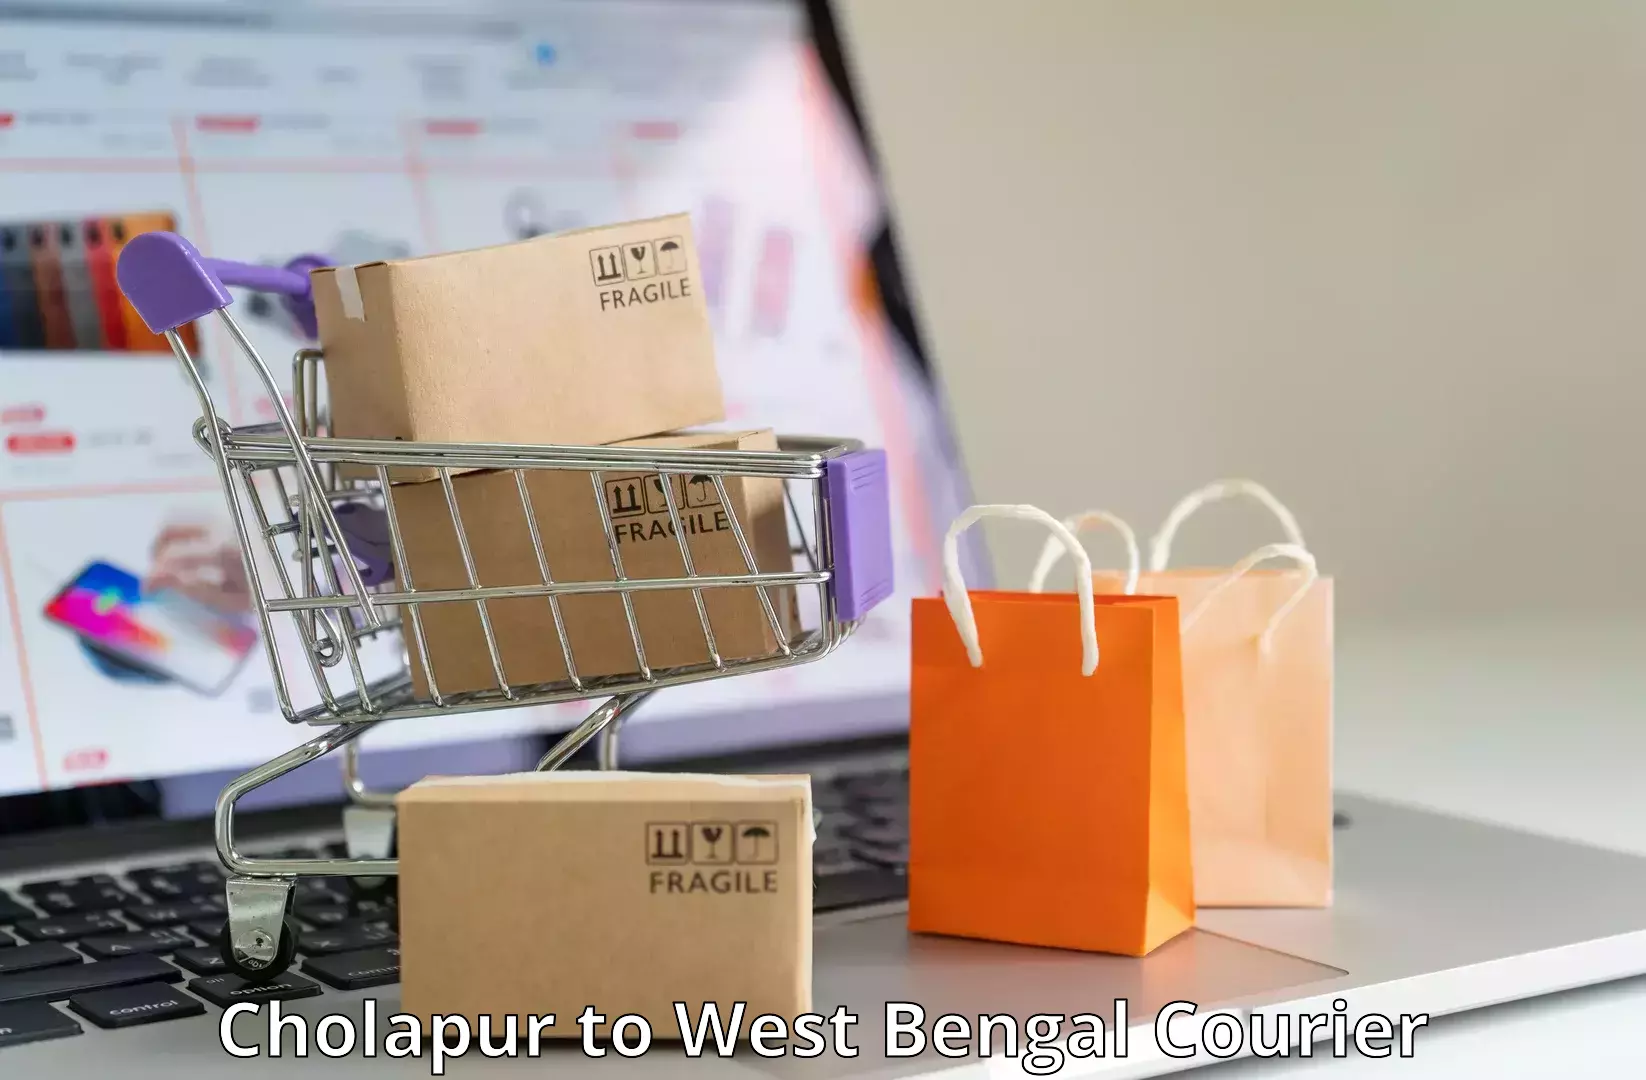 Express delivery network Cholapur to Rampurhat